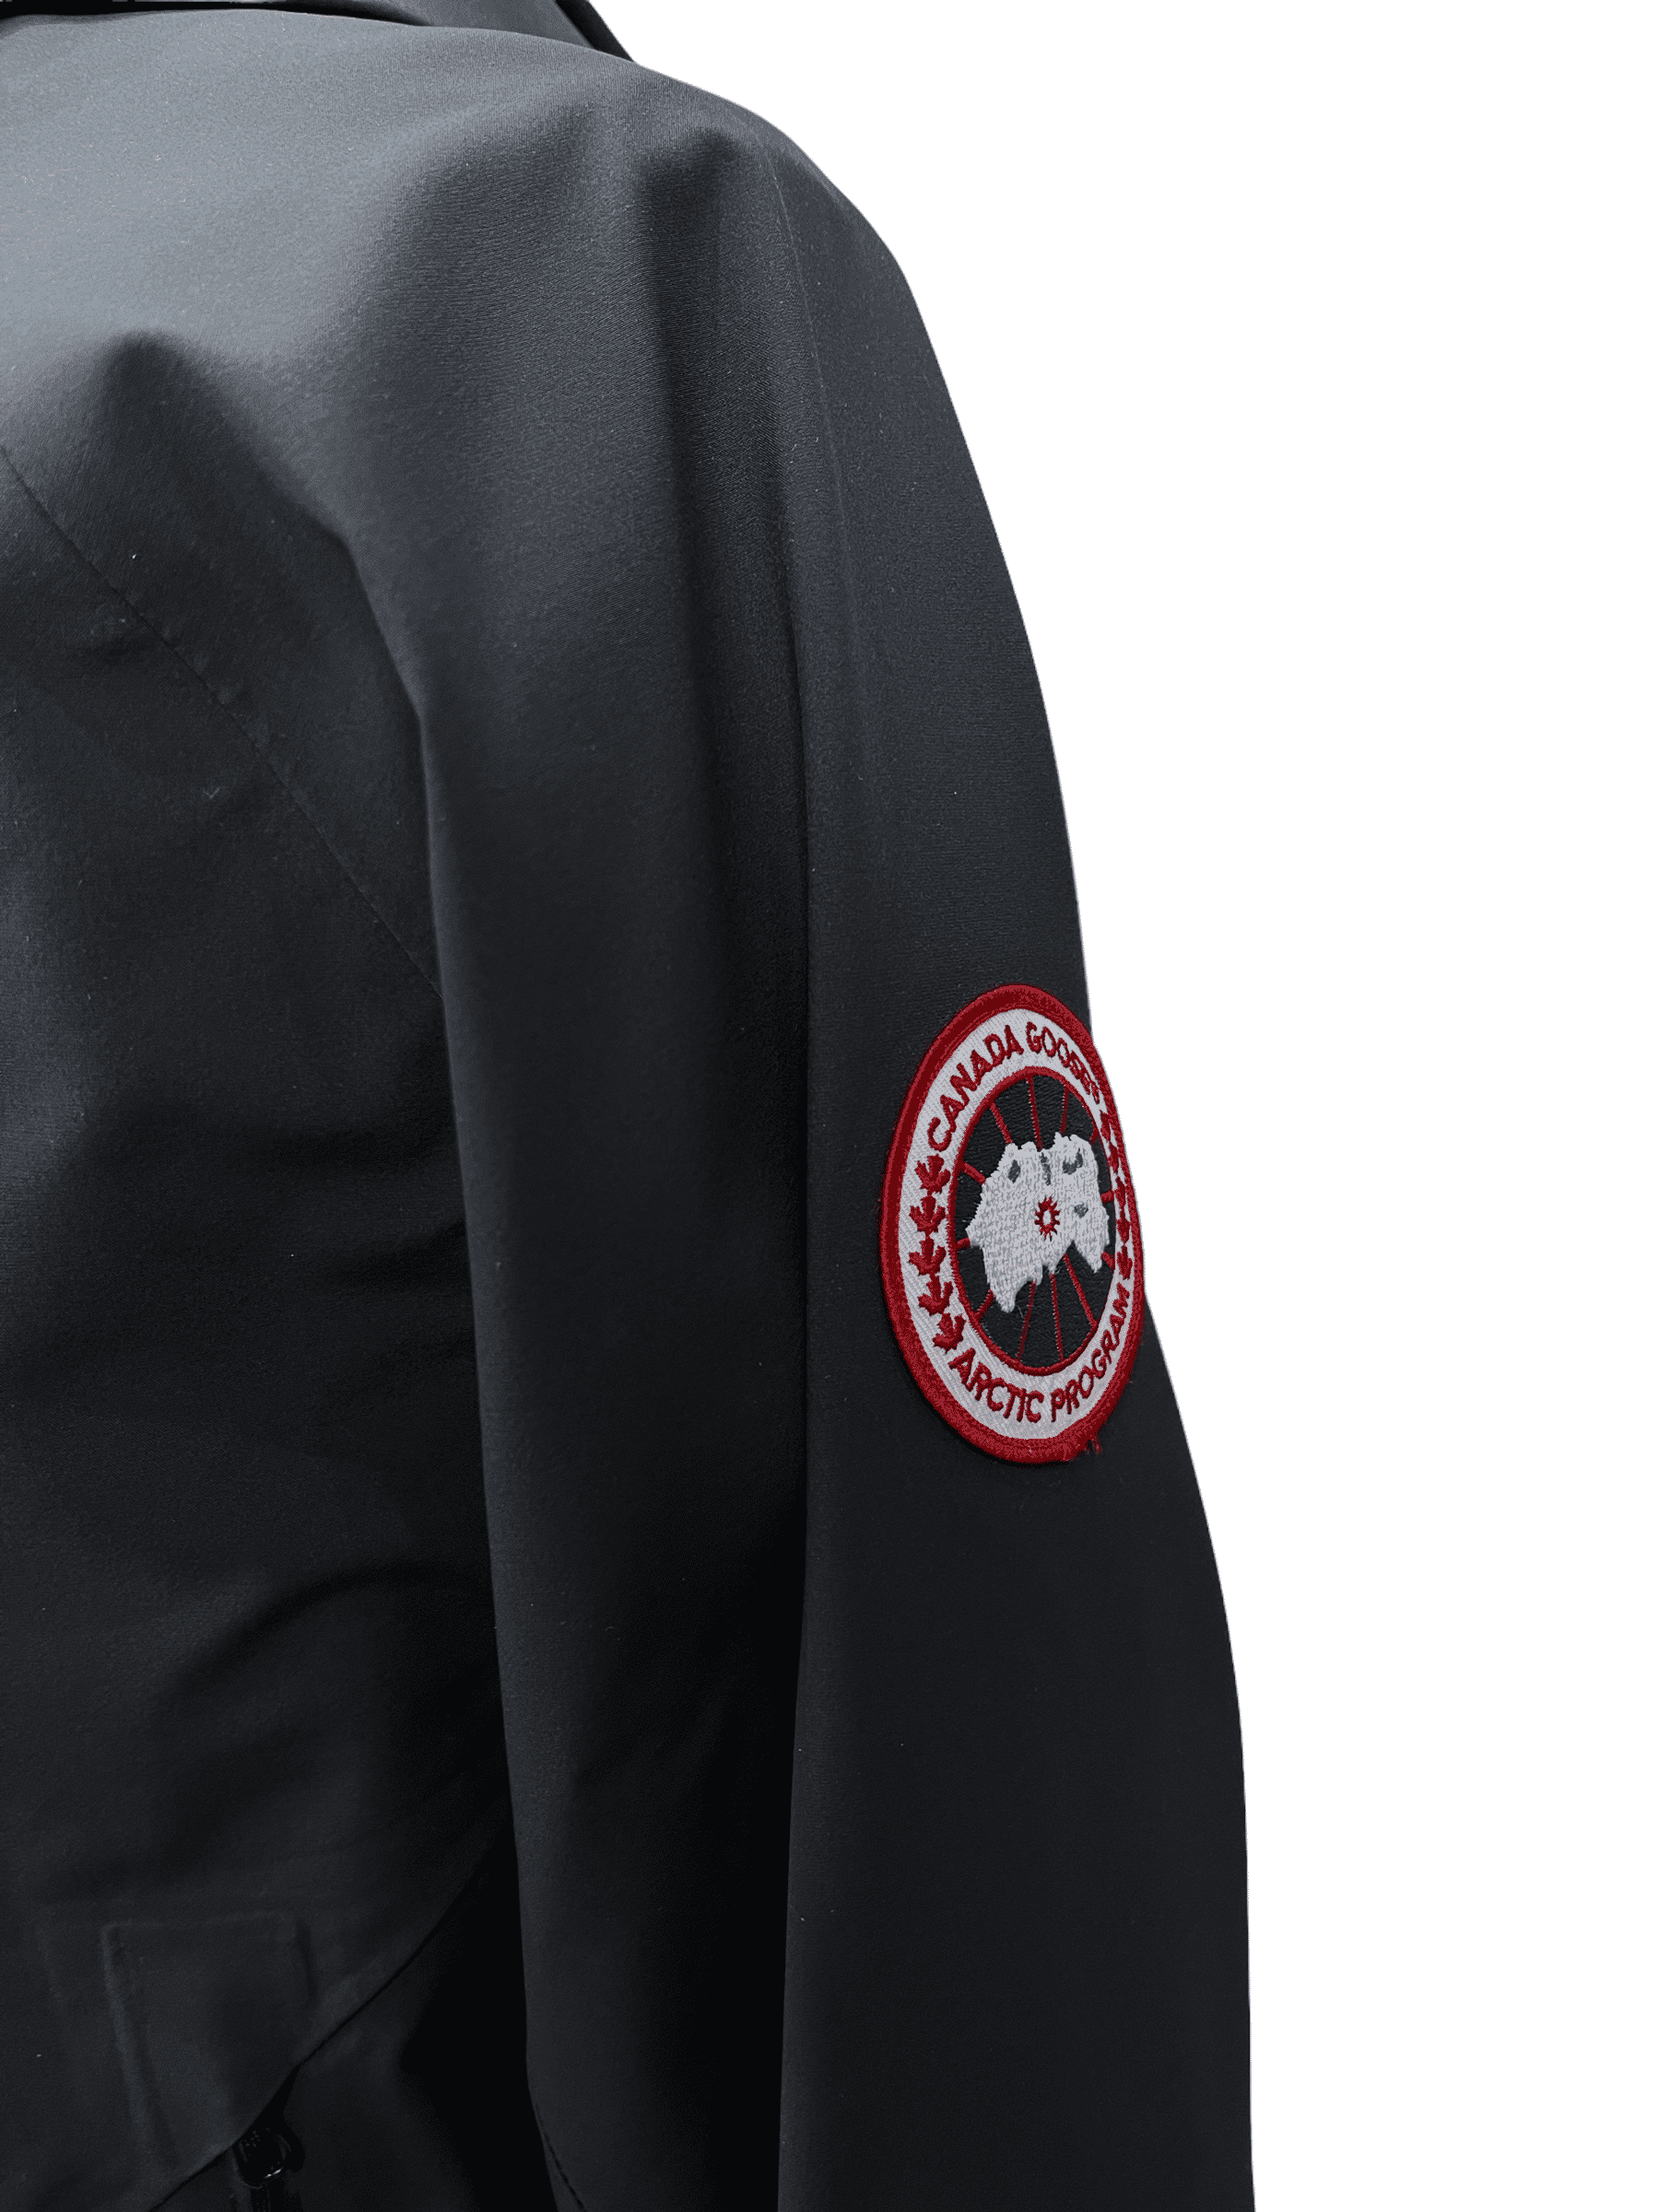 Canada Goose Black Gore-TEX Jacket - Genuine Design Luxury Consignment for Men. New & Pre-Owned Clothing, Shoes, & Accessories. Calgary, Canada